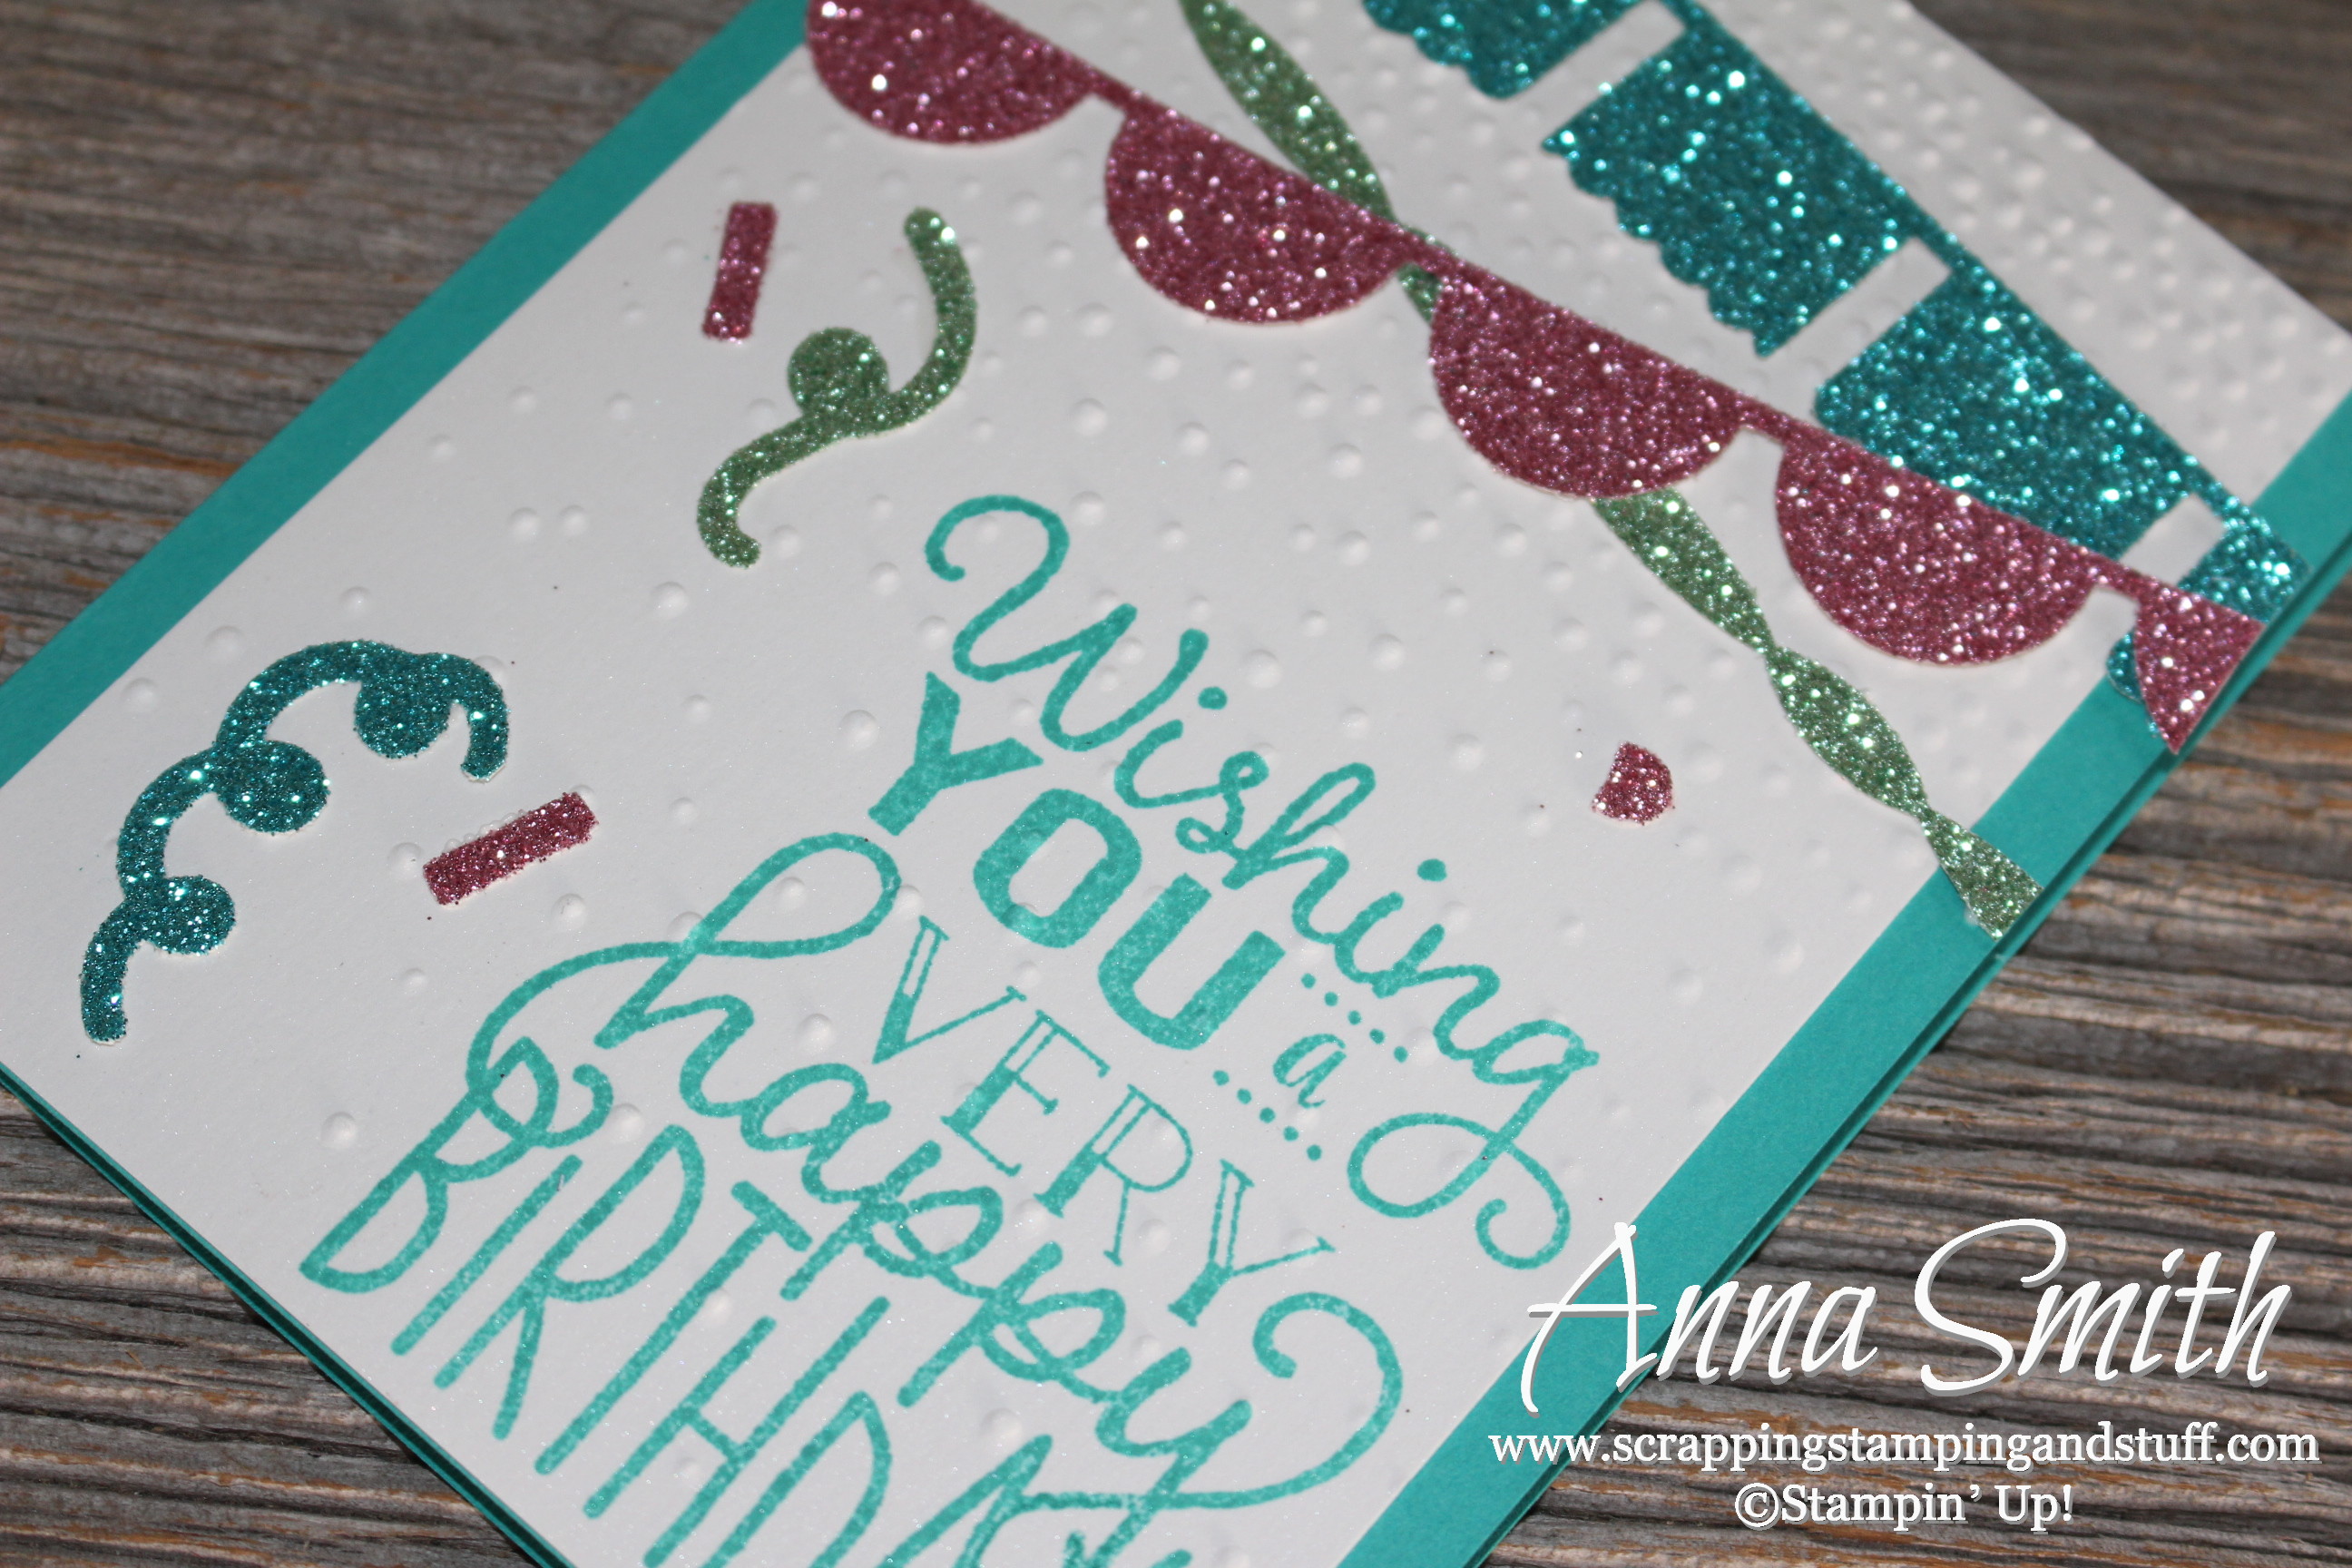 Fun glitter banner Stampin' Up! birthday card idea using Fiesta Time framelits, Big on Birthdays stamp set, and the sprinkles punch! Occasions 2017 Catalog